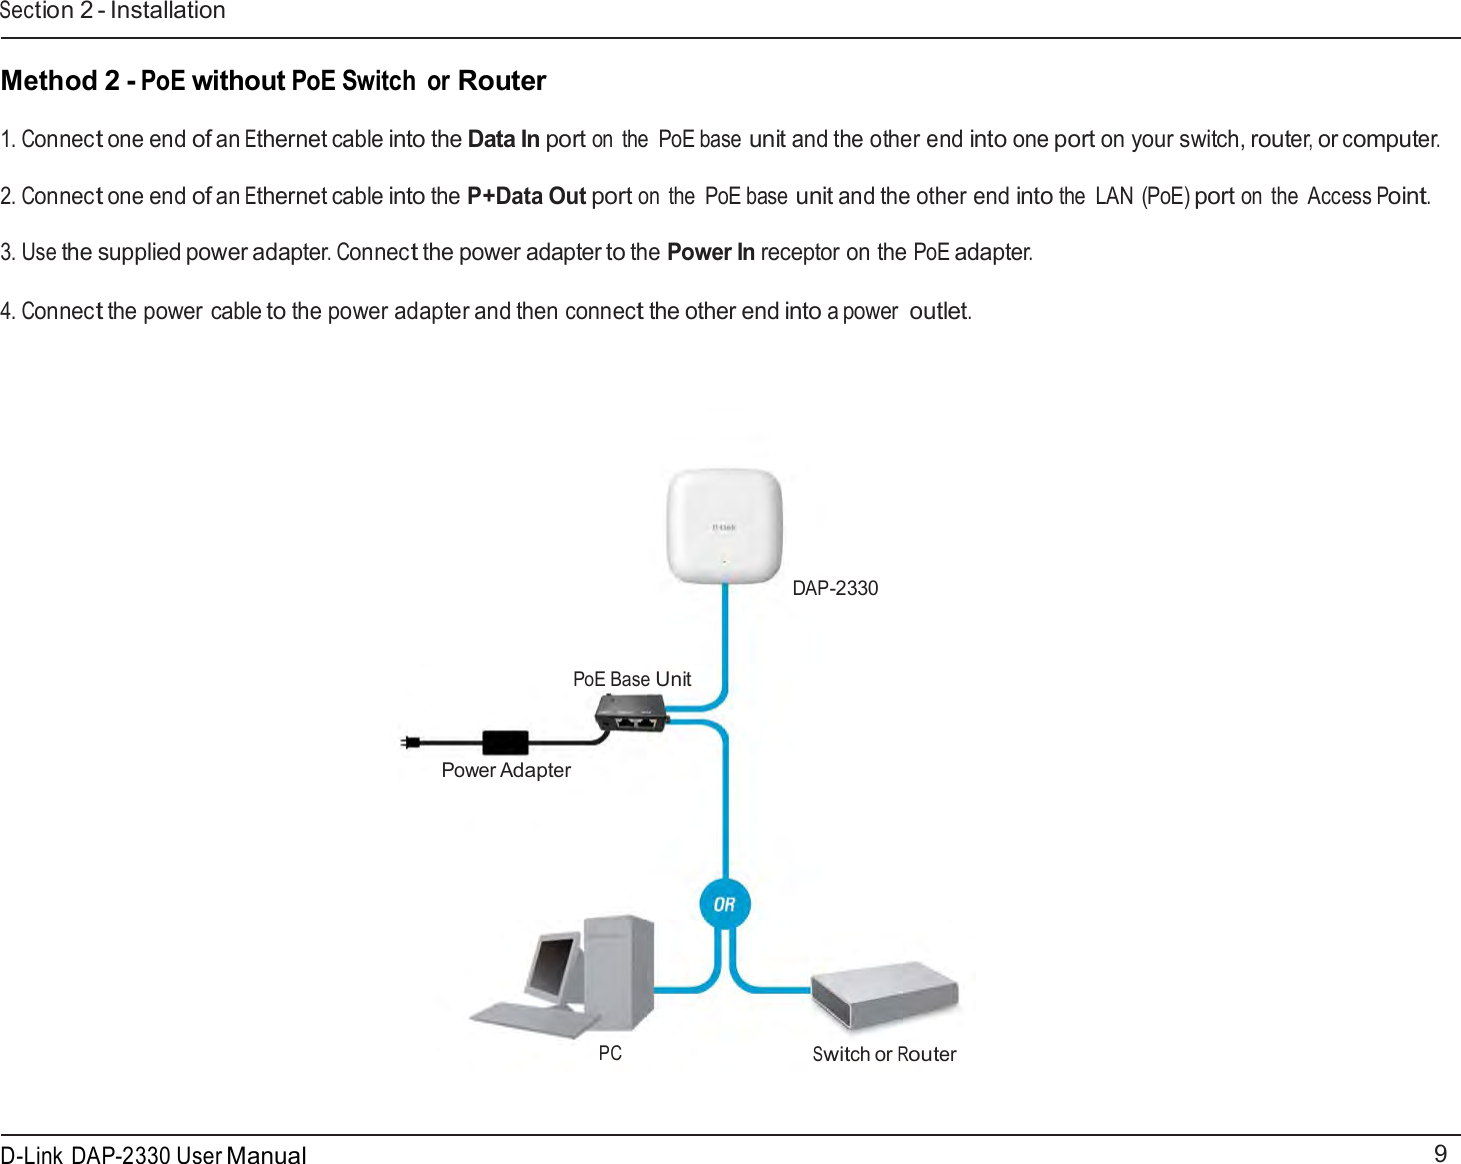 9 D-Link DAP-2330 User ManualSection 2 - Installation      Method 2 - PoE without PoE Switch  or Router  1. Connect one end of an Ethernet cable into the Data In port on  the  PoE base unit and the other end into one port on your switch, router, or computer.  2. Connect one end of an Ethernet cable into the P+Data Out port on  the  PoE base unit and the other end into the  LAN (PoE) port on the  Access Point.  3. Use the supplied power adapter. Connect the power adapter to the Power In receptor on the PoE adapter.  4. Connect the power cable to the power adapter and then connect the other end into a power outlet.             DAP-2330    PoE Base Unit    Power Adapter              PC Switch or Router 